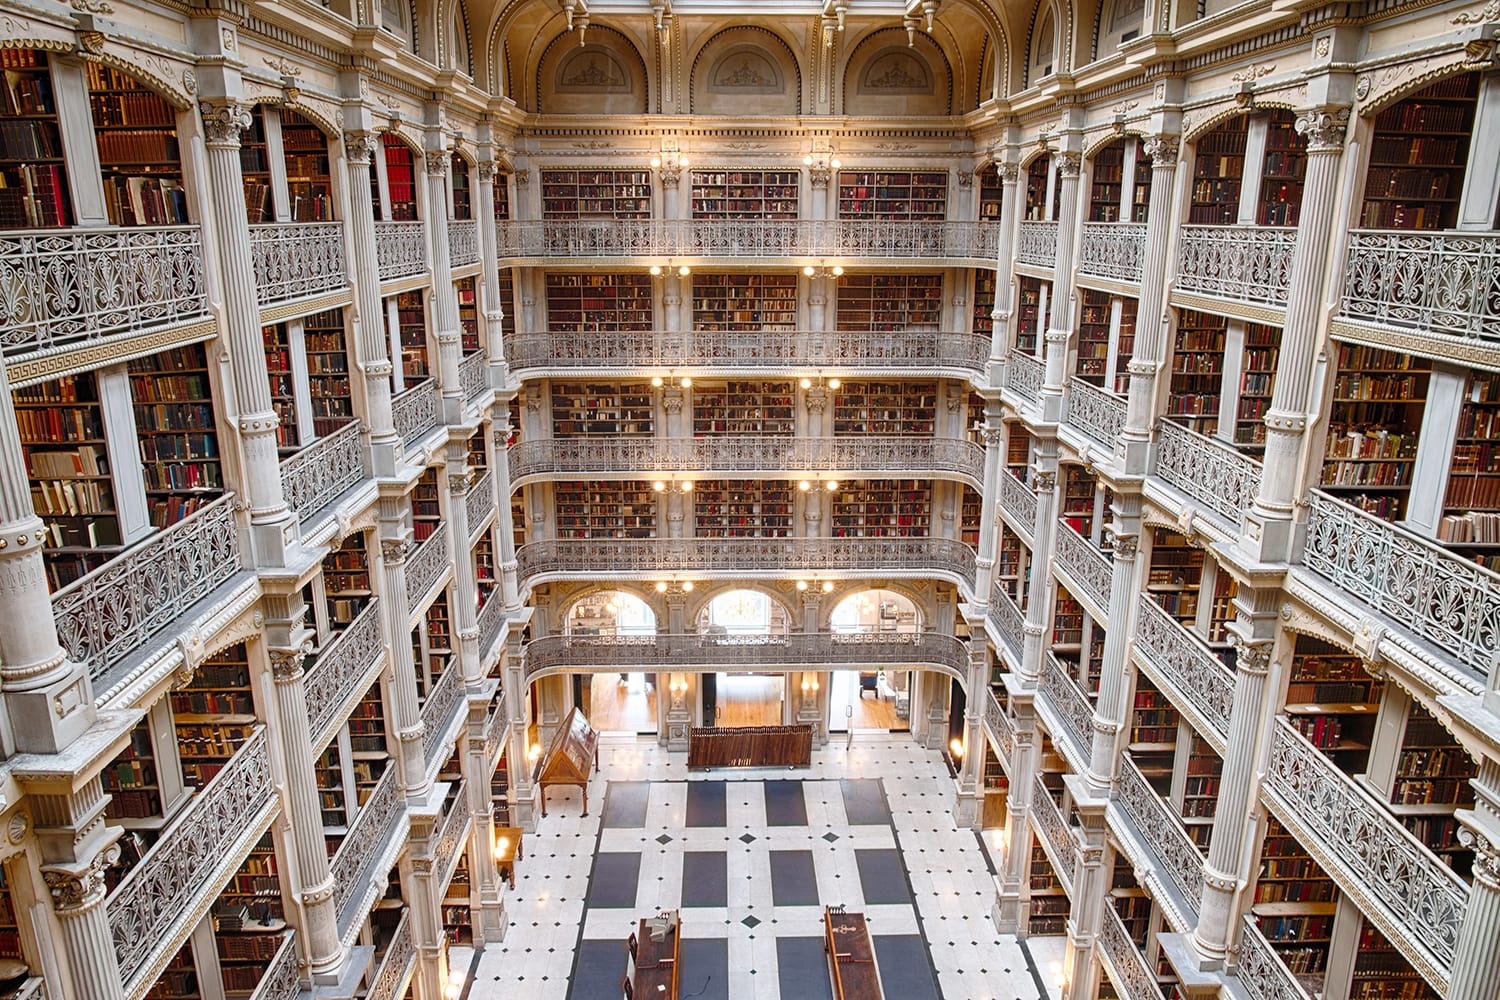 Bookshelf inside Peabody Library a research library for John Hopkins University in Baltimore, USA